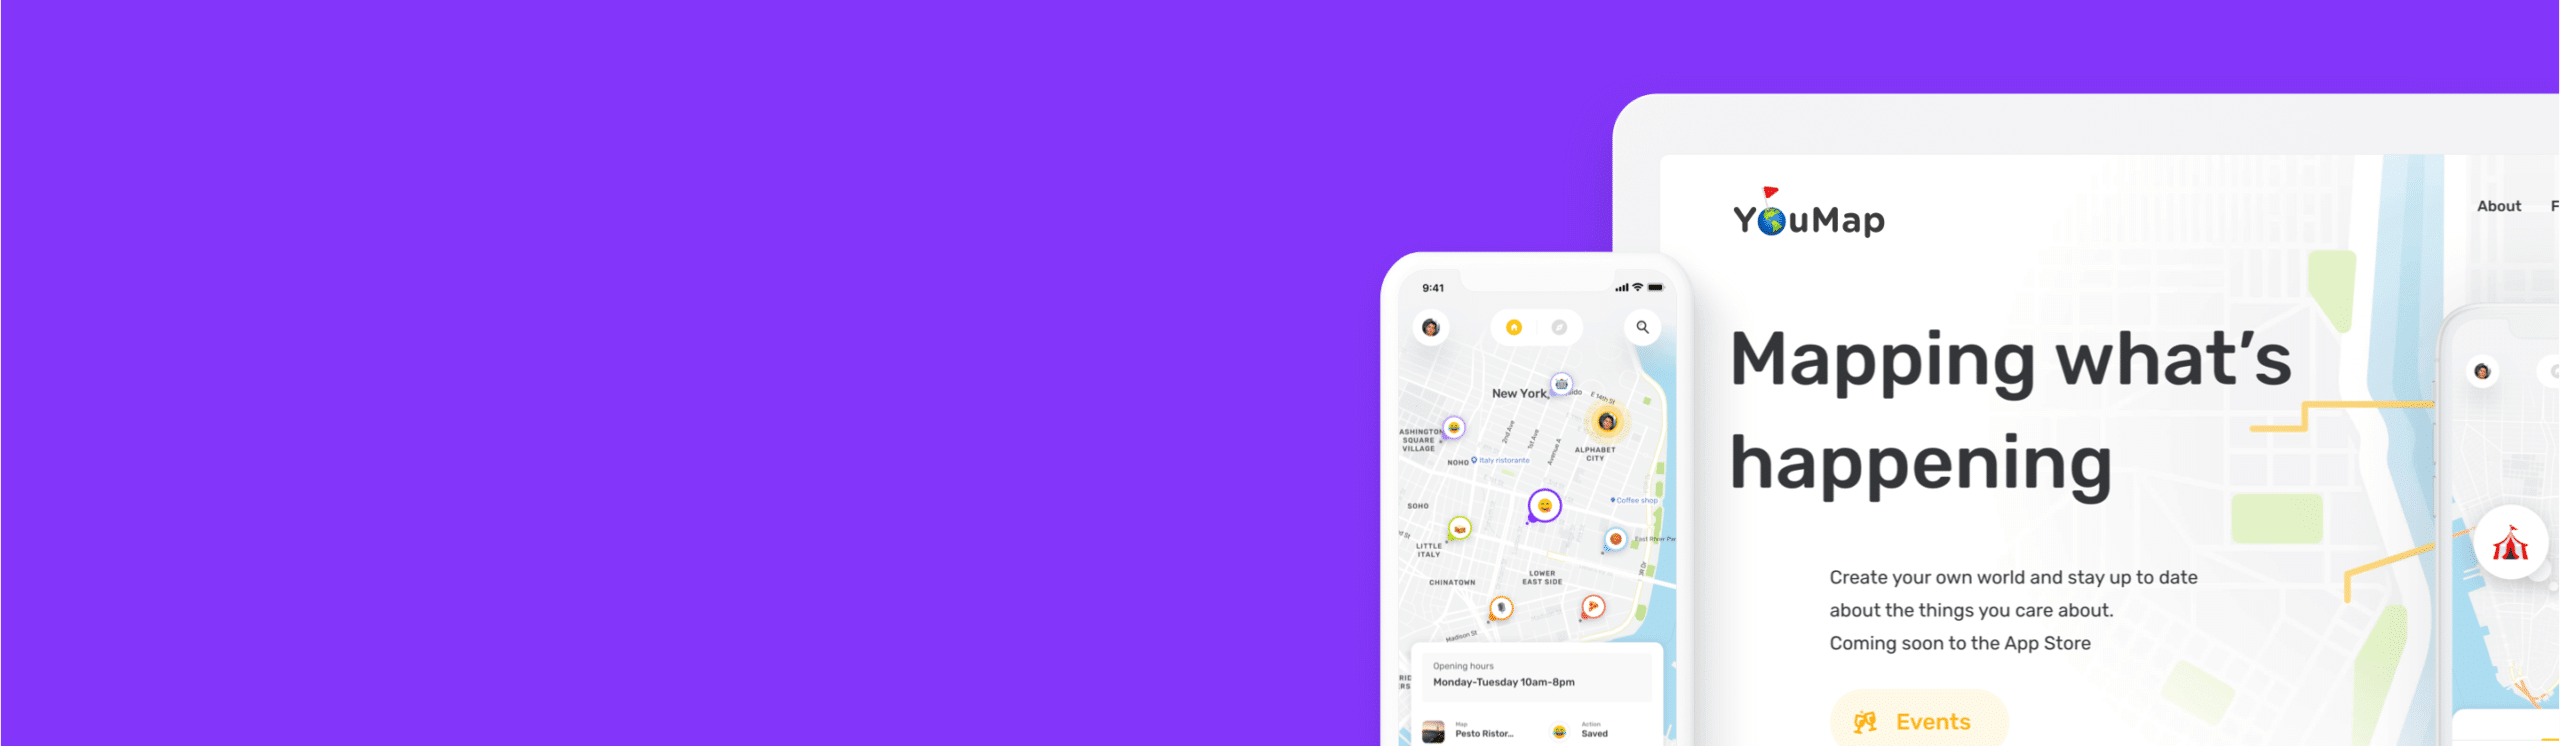 YouMap - network mapping app